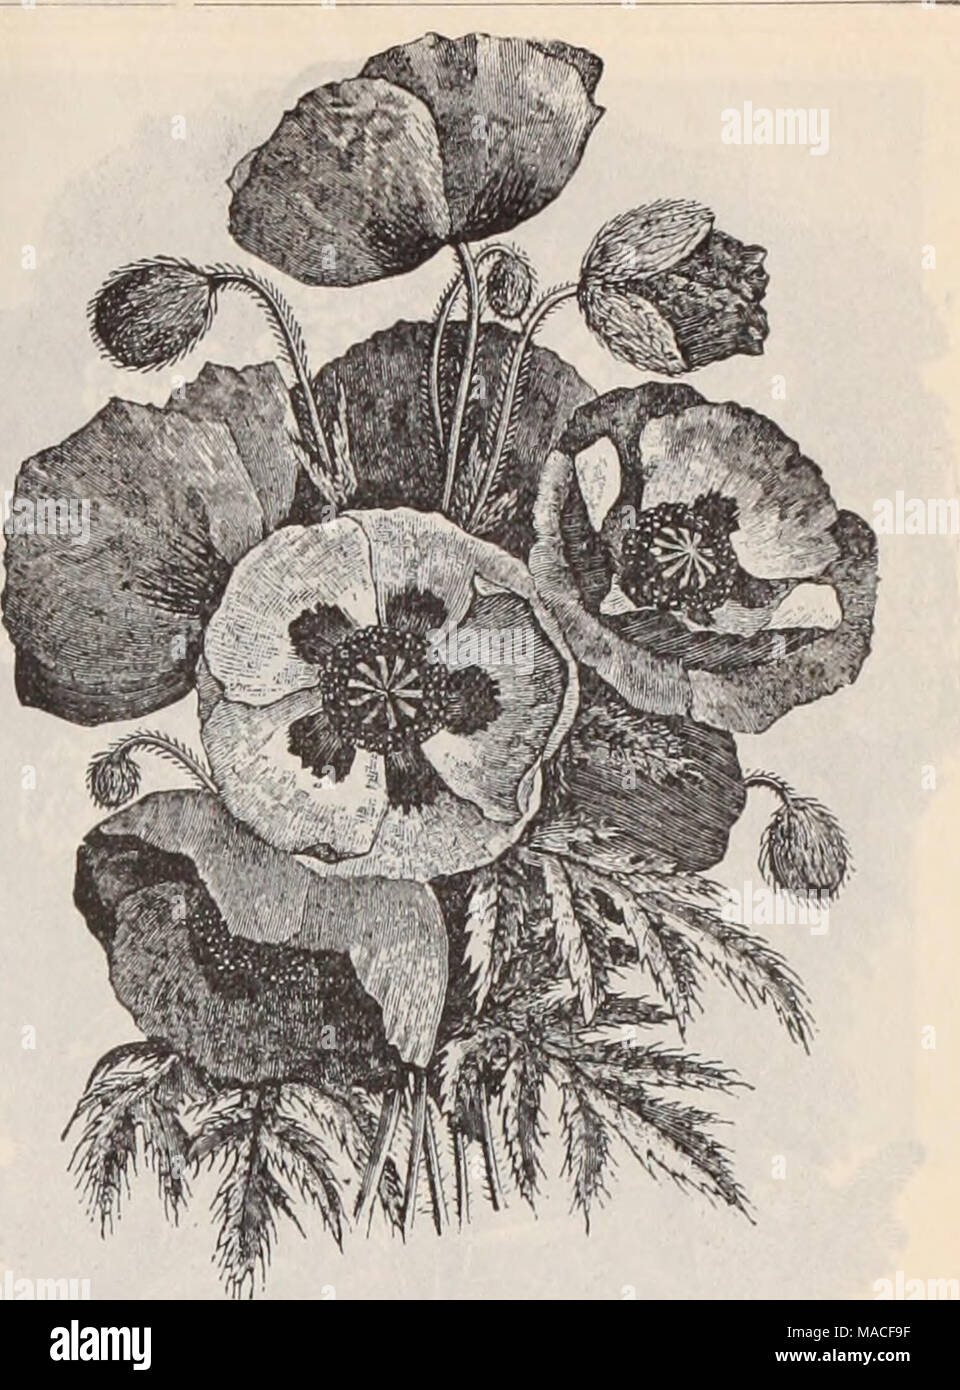 . Dreer's wholesale price list / Henry A. Dreer. . Obientale Poppies. PhlOS (Moss Pinks). Per doz. Pe, ' 100. Subulata Alba. Pure white ; clumps . ) ?o 75 ^ &gt;5 00 &quot; Atropurpurea. Purplish rose. clumps . 75 5 00 &quot; Liiacina. Light lilac ; clumps. 75 5 00 &quot; Nelsoni. Pure white ; clumps . 75 5 oo- '' Rosea. Bright rose; clumps 75 5 00 &quot; The Bride. White with rosy eye ; clumps . 75 5 00 Amoena. Clumps 75 5 00 Divaricata Candensis. 2-inch pots . 75 5 00 New Perennial Phlox. The varieties listed below are the &quot;cream &quot; of recent intro- ductions, and are a superb collec Stock Photo